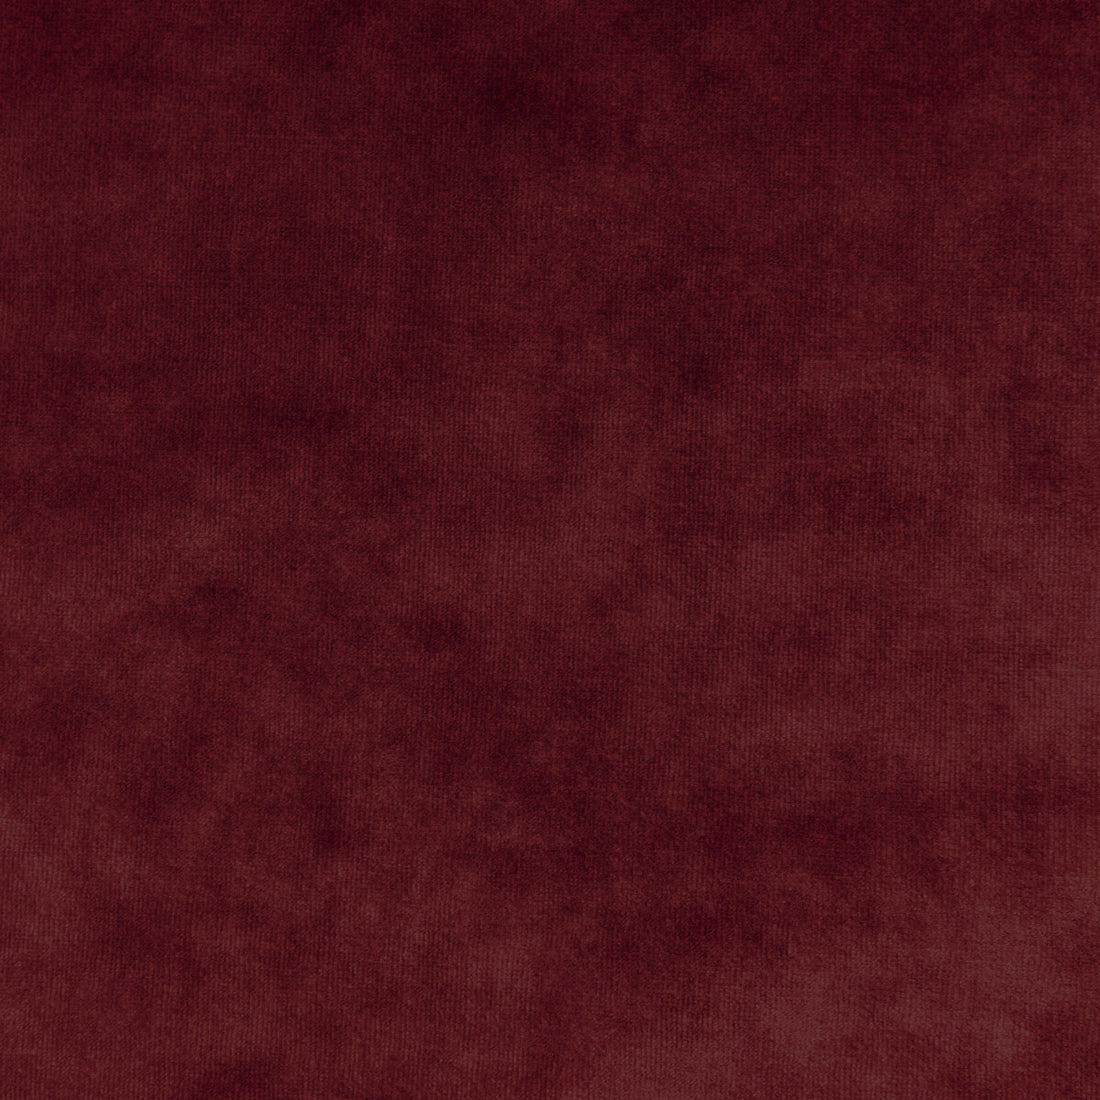 Regal Velvet fabric in ruby color - pattern 36064.9.0 - by Kravet Couture